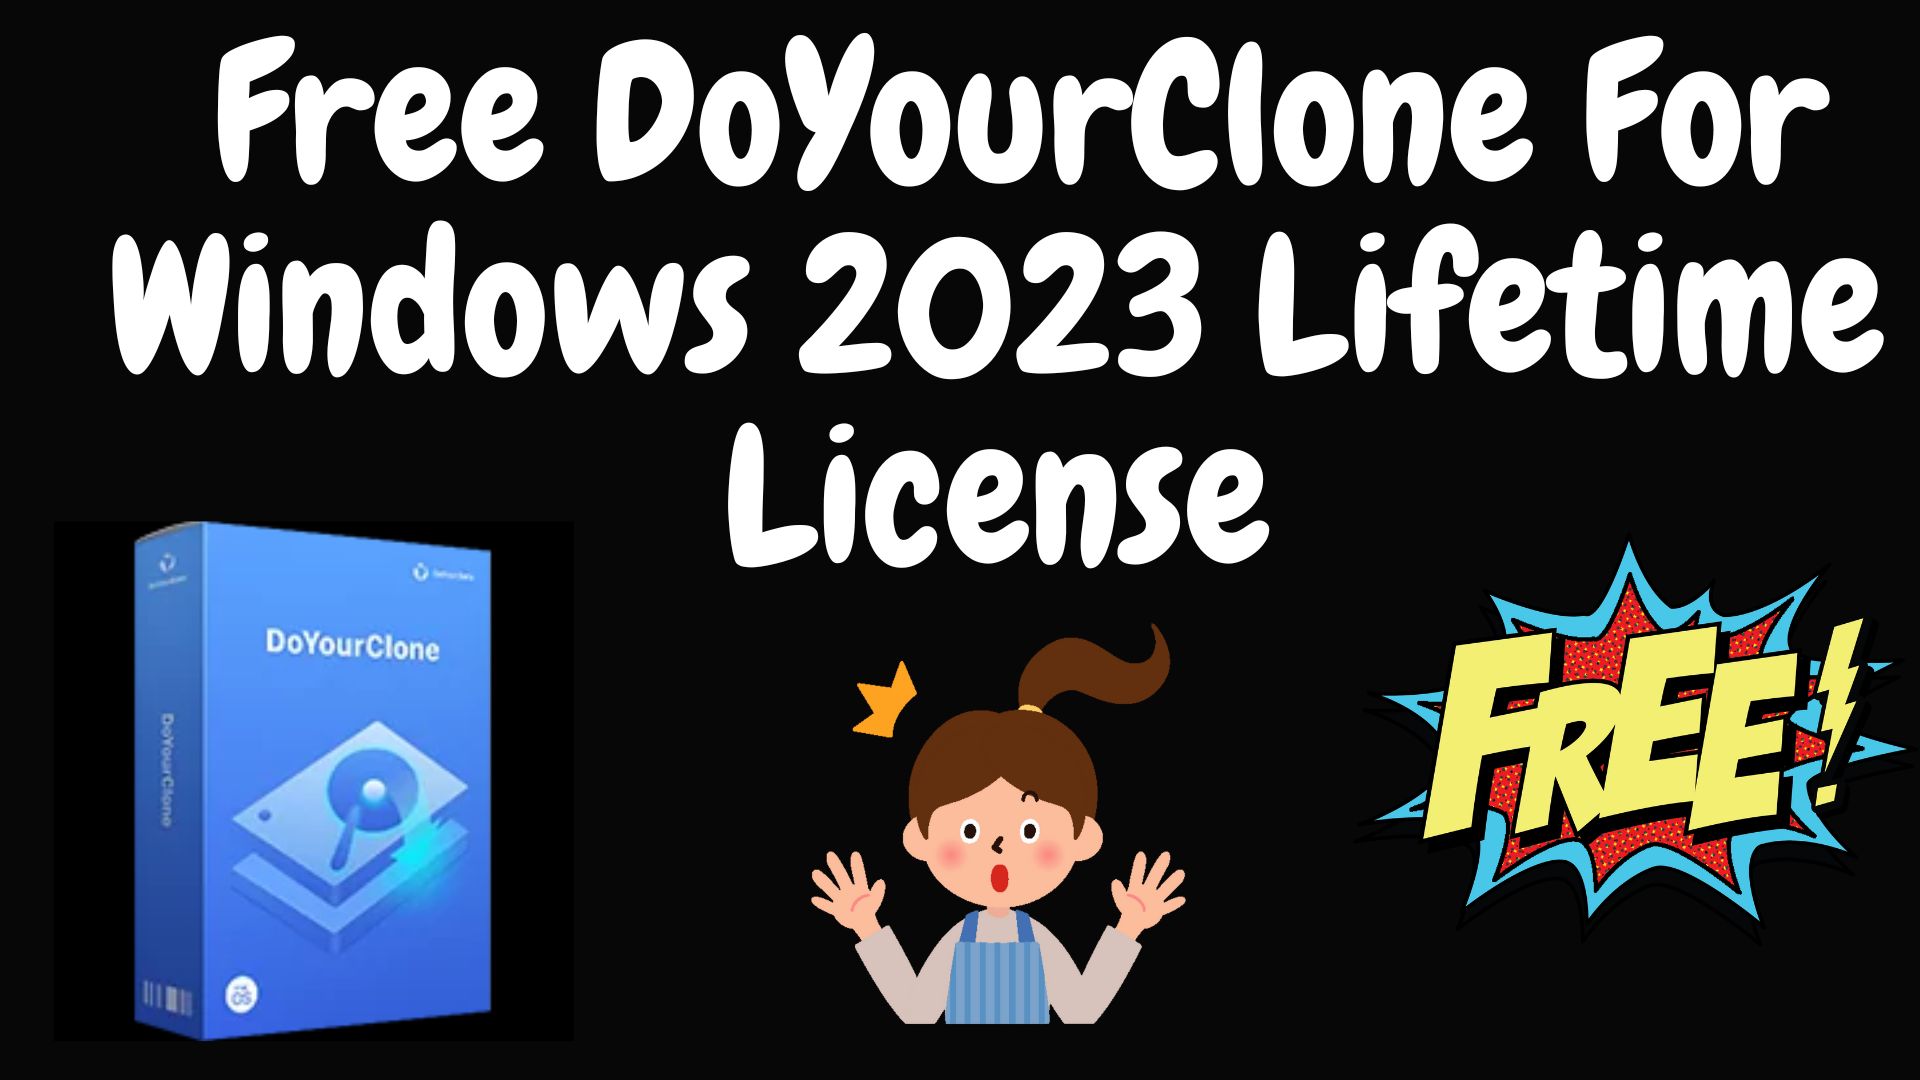 Free doyourclone for windows 2023 lifetime license